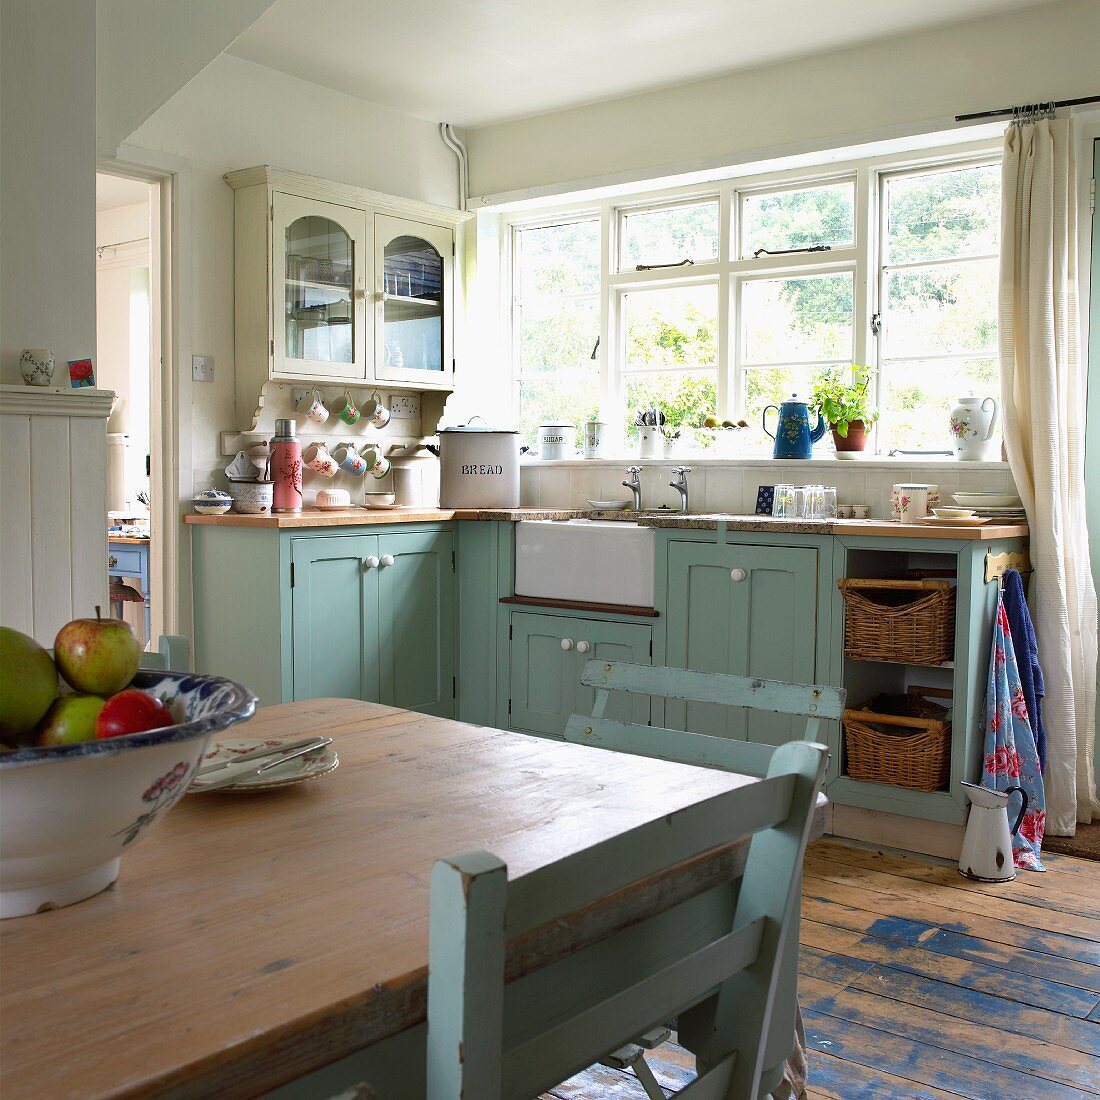 Old, pastel blue kitchen-dining room in English country-house style; bowl of apples on dining table in foreground